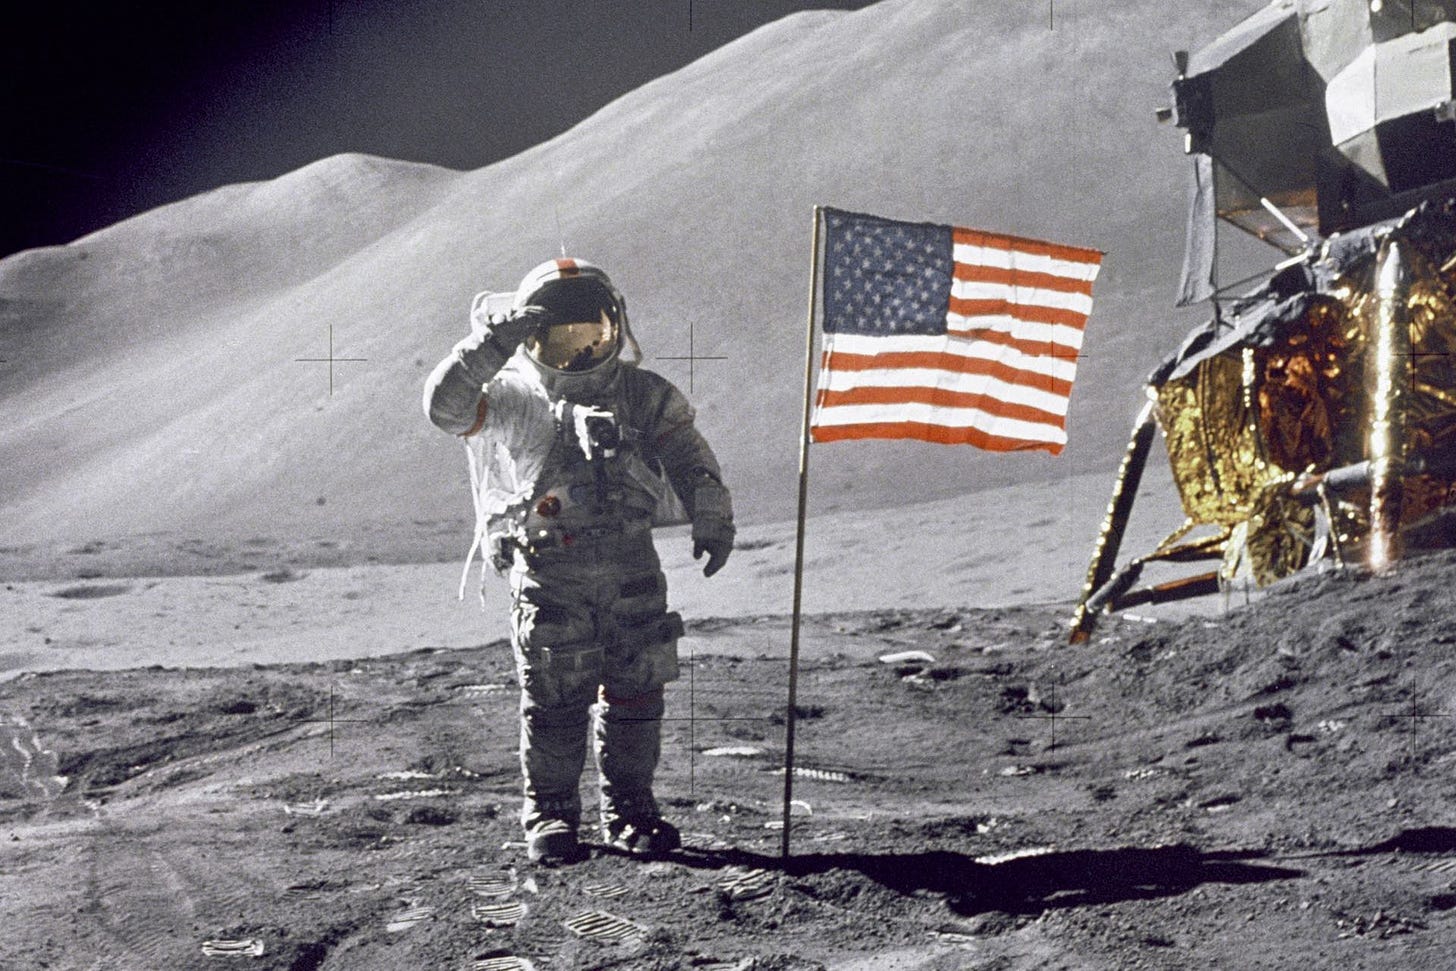 Houston May Have a Problem: NASA to Let Alabama Lead on Moon Landing ...